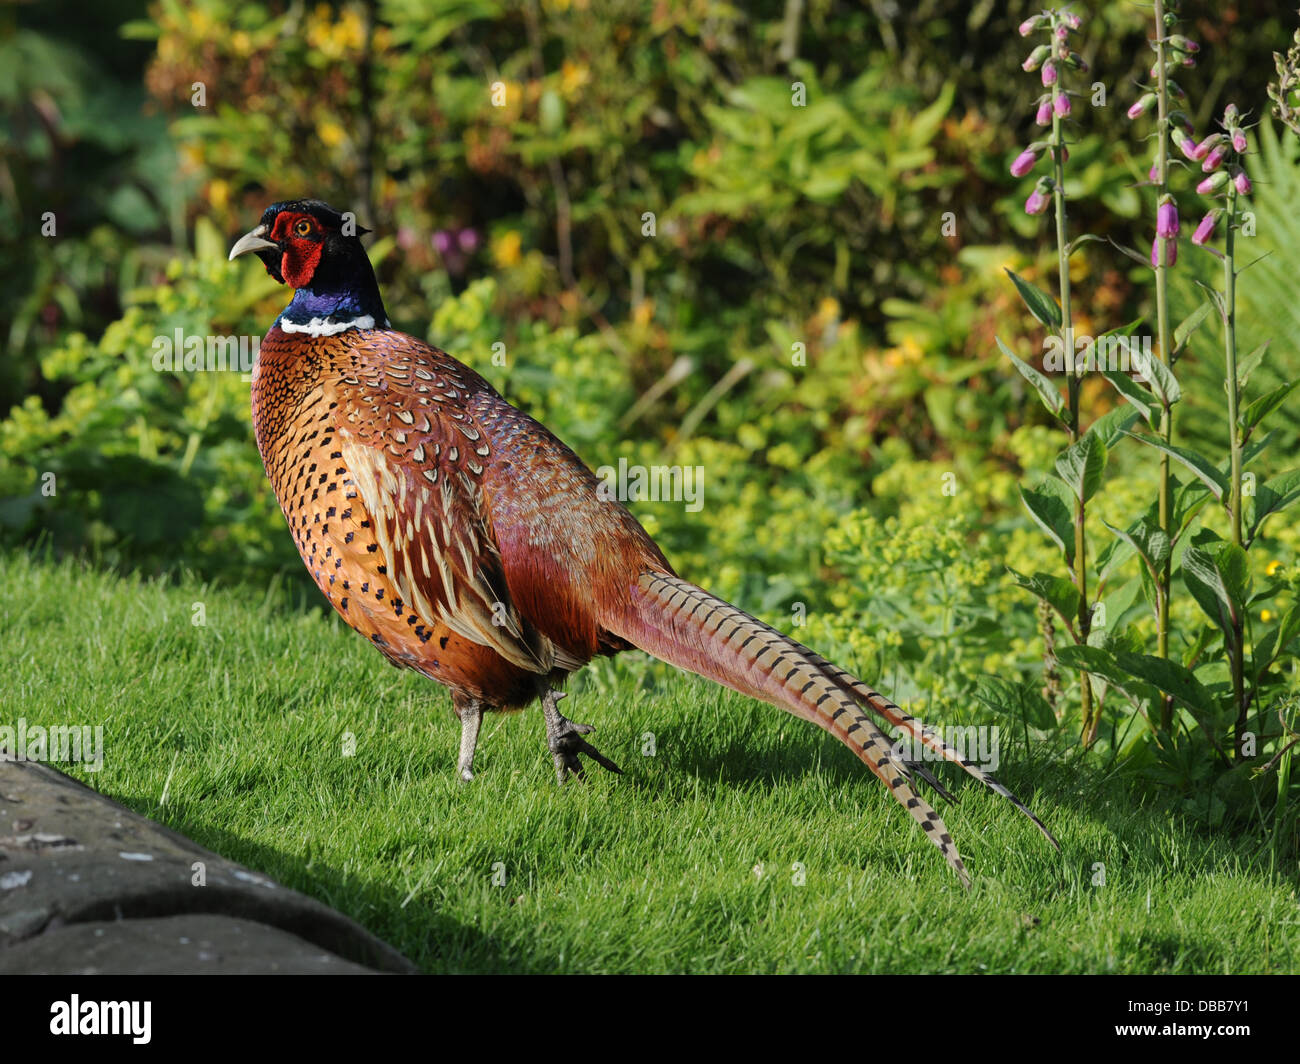 A very proud male pheasant strutting in a garden. Stock Photo